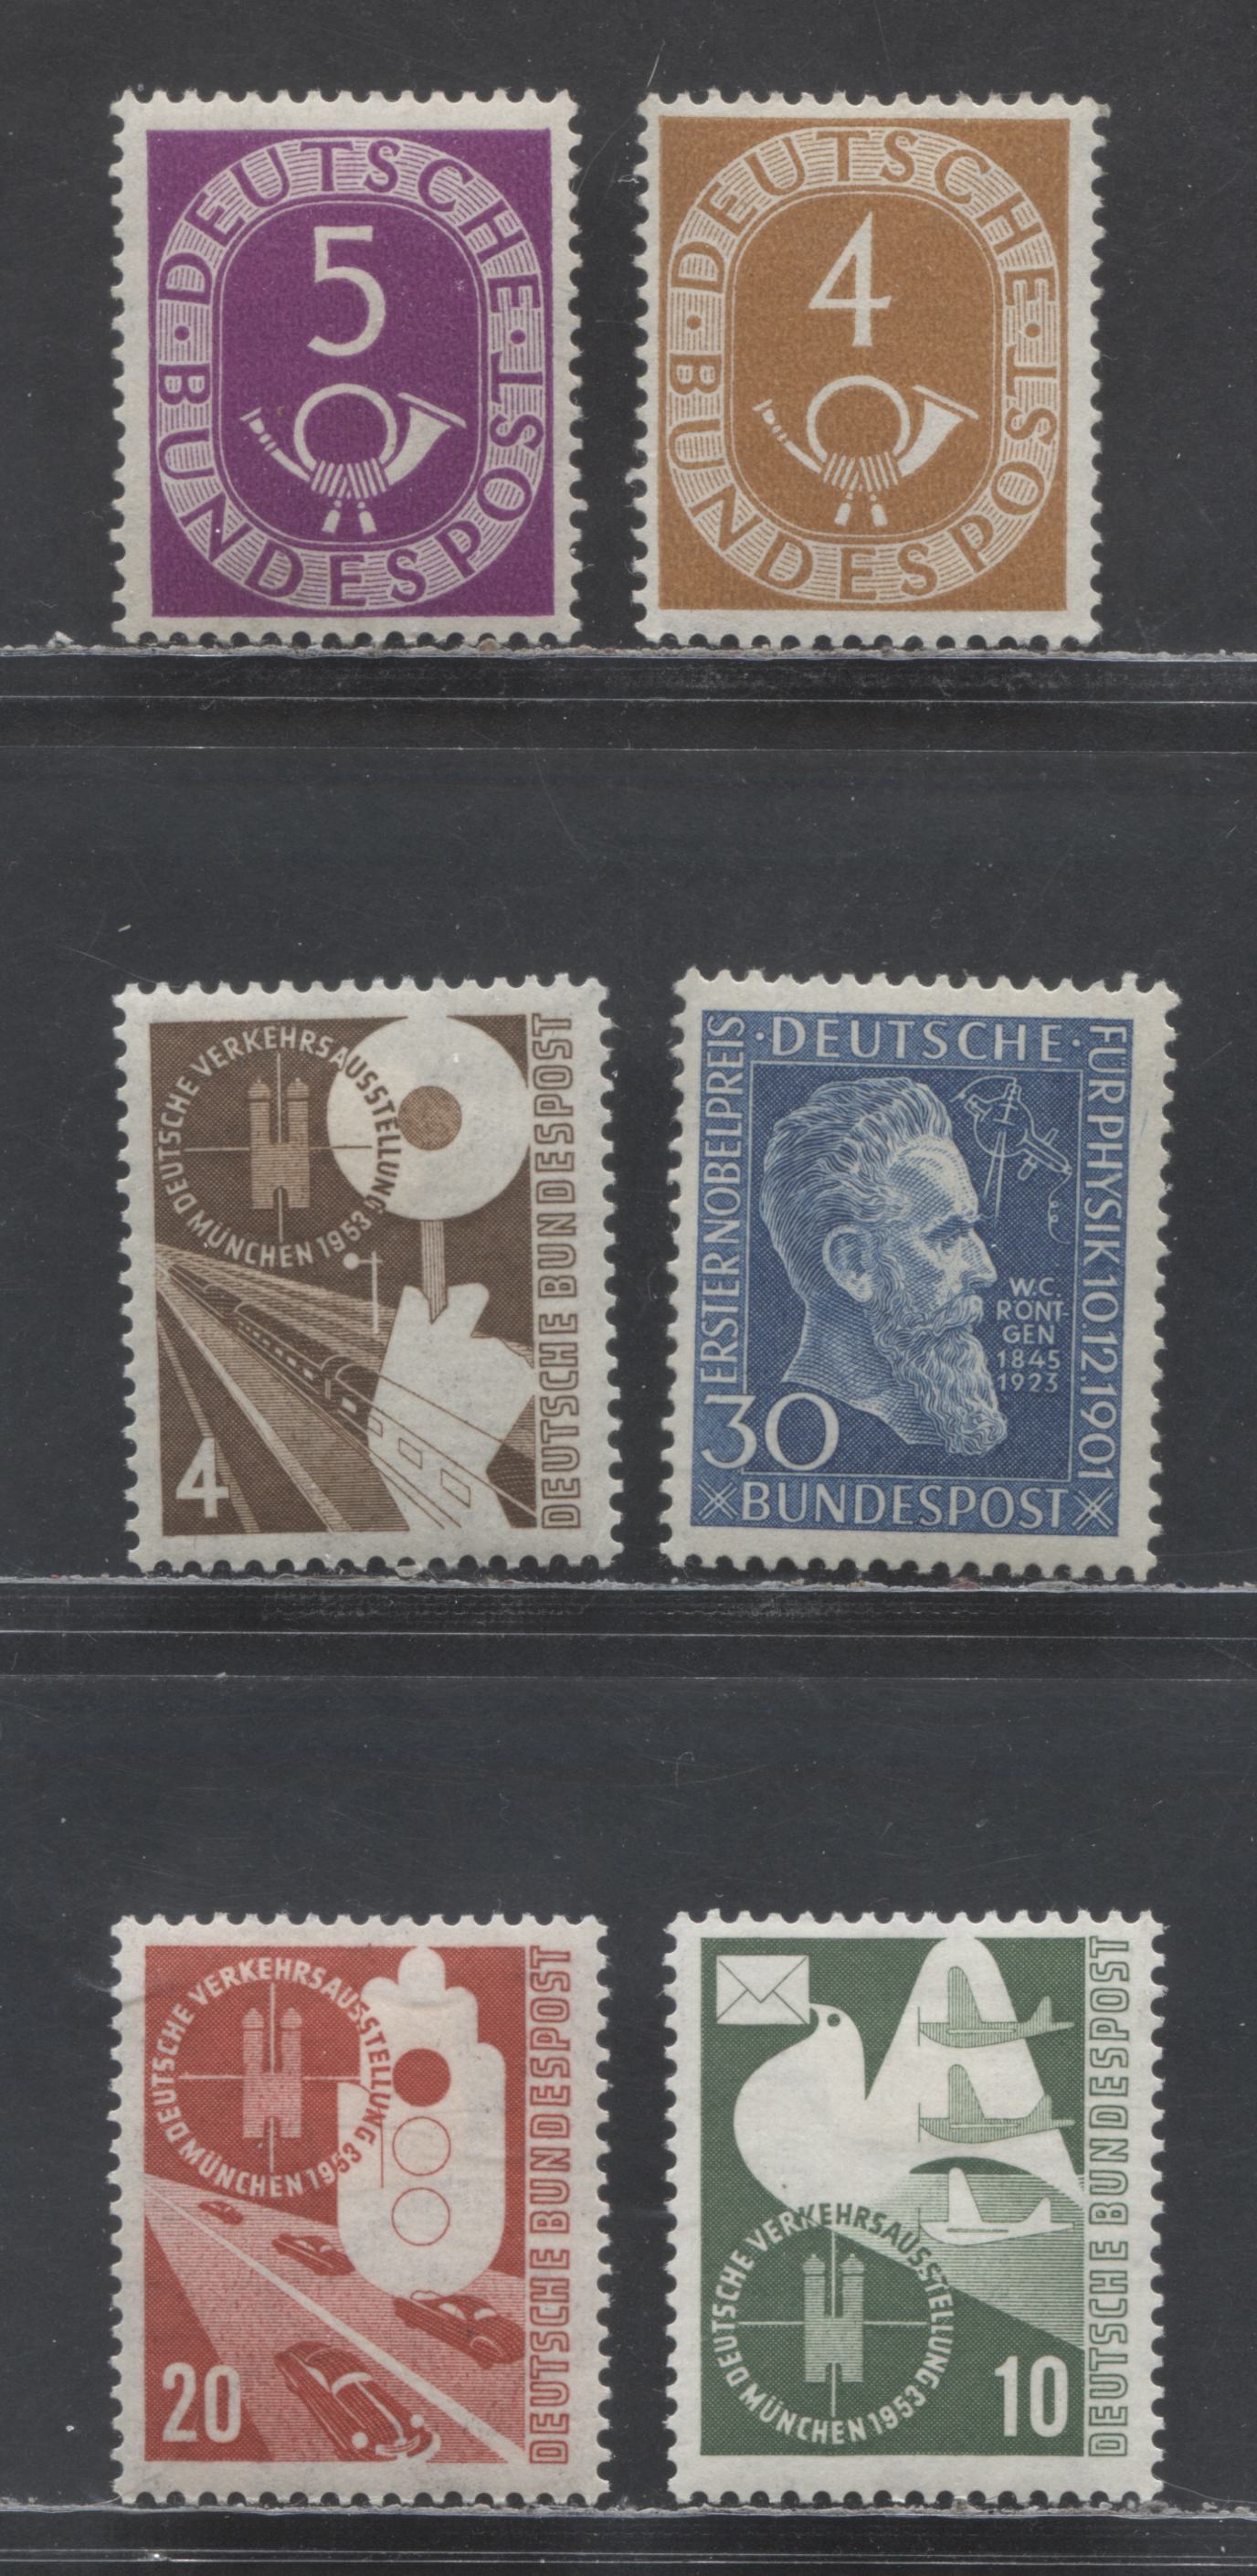 Lot 21 Germany SC#671/700 1951-1952 Posthorn Definitives - Exhibition Of Transport & Communications, 6 VFOG Singles, Click on Listing to See ALL Pictures, Estimated Value $19